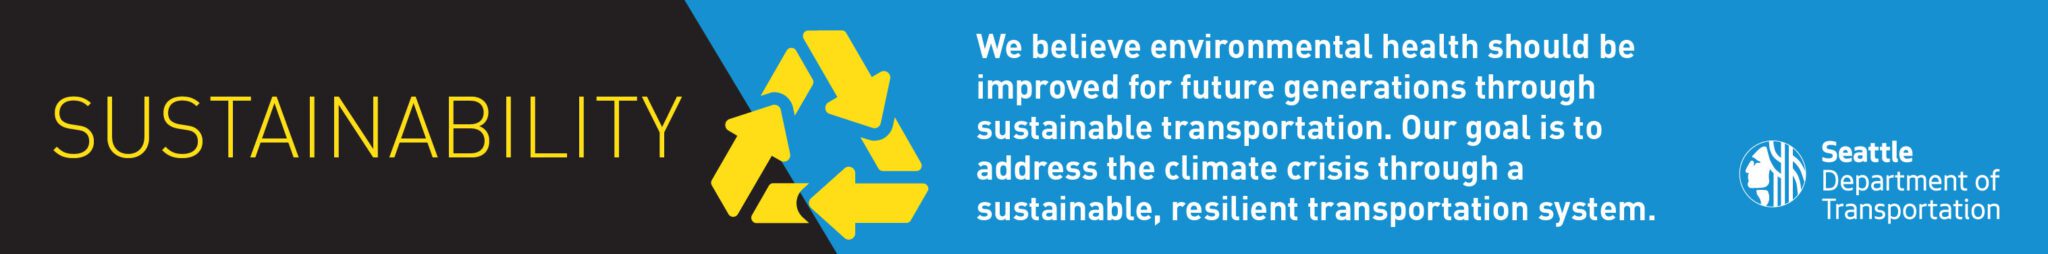 Sustainability graphic. The image includes the word sustainability in large font, with a yellow recycling icon, as well as descriptive text about sustainability, and the SDOT logo.